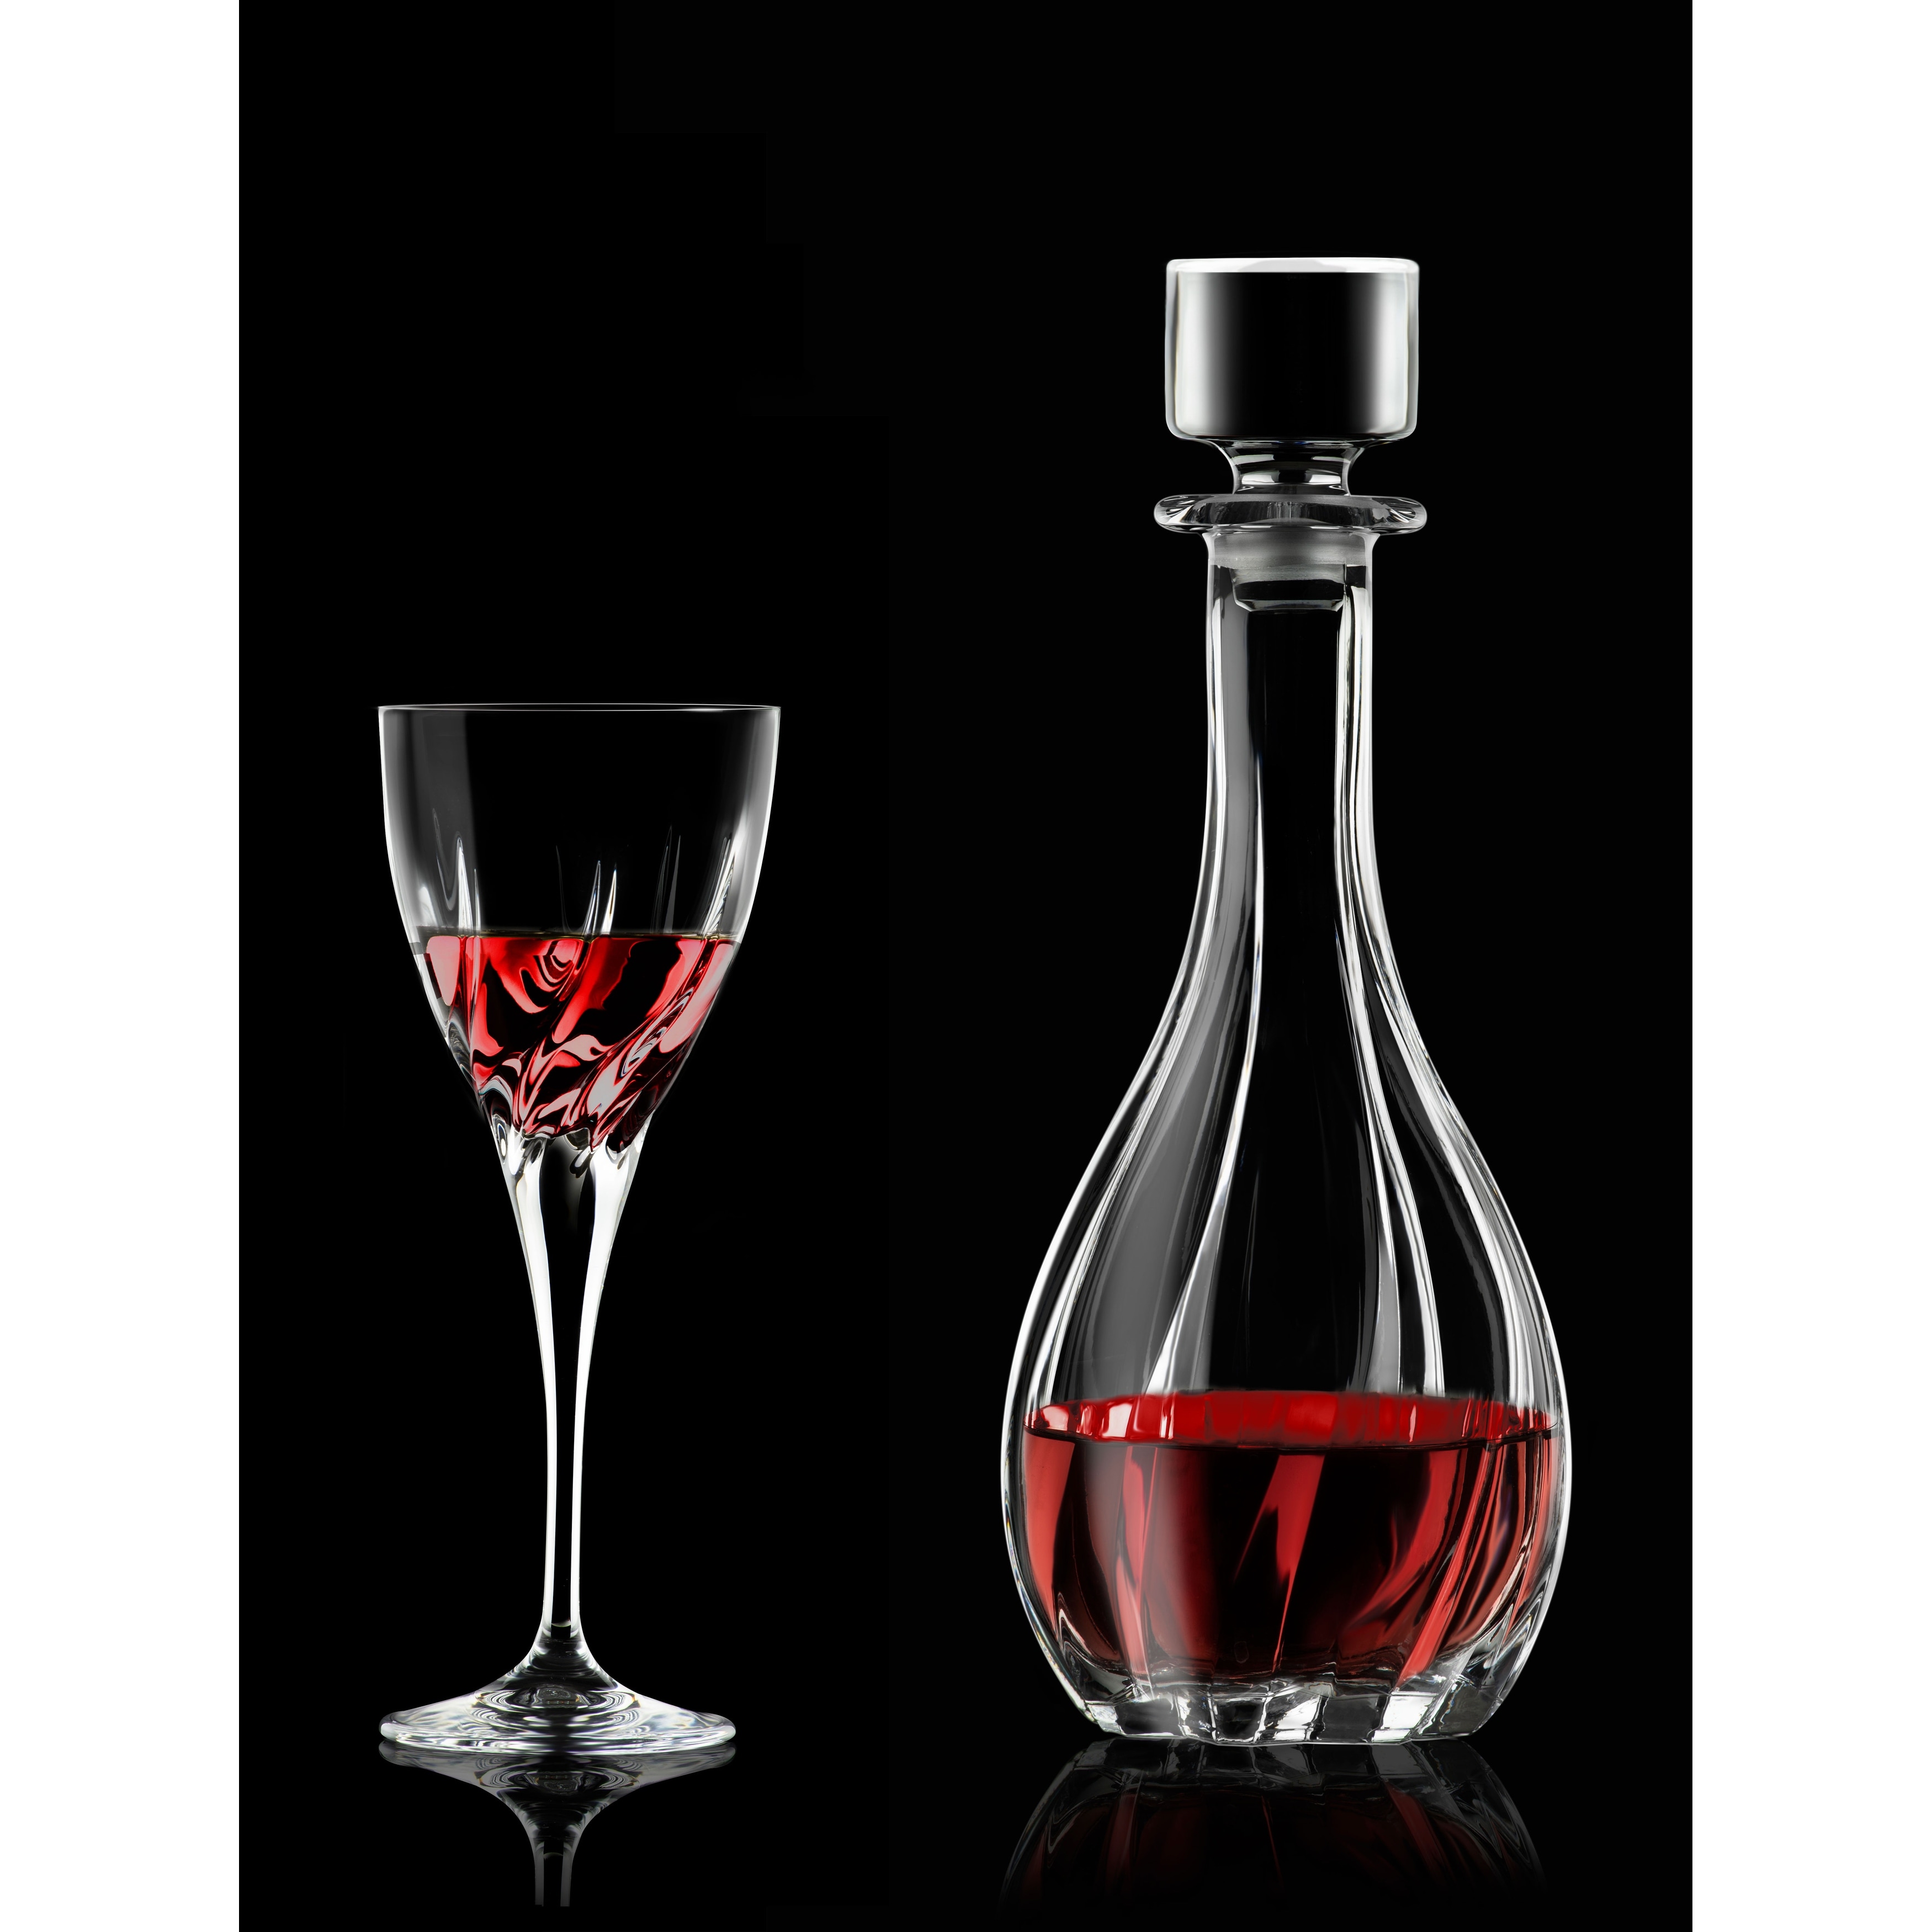 https://ak1.ostkcdn.com/images/products/is/images/direct/6da7c90dd5ddd85a84ee6e565c8a21ca02c25251/Majestic-Gifts-Inc.-European-Glass-Wine-Decanter-W--Stopper--30-Oz..jpg